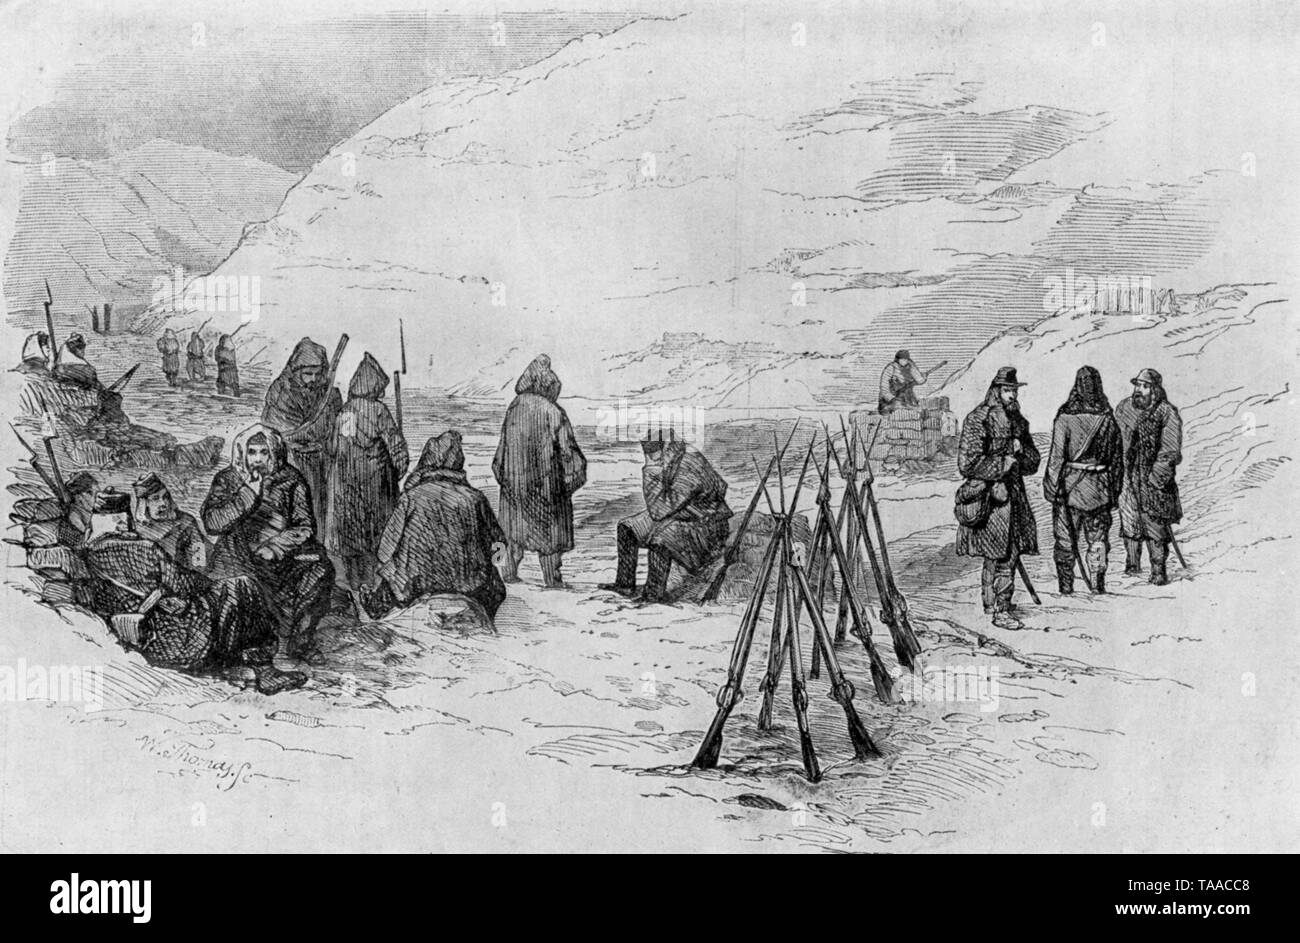 'Winter in the Crimea, 1855'. By W Thomas. An outlying picket of the 90th Regiment in the snow, in the Middle ravine, before Sebastopol. From 'The Illustrated London News', 10th March 1855. The Crimean War (1853-1856) was a conflict between the Russian Empire and an alliance of European Empires including France, Britain and Sardinia. The war was part of a long-running contest between major European powers for influence over territories of the declining Ottoman Empire. Stock Photo